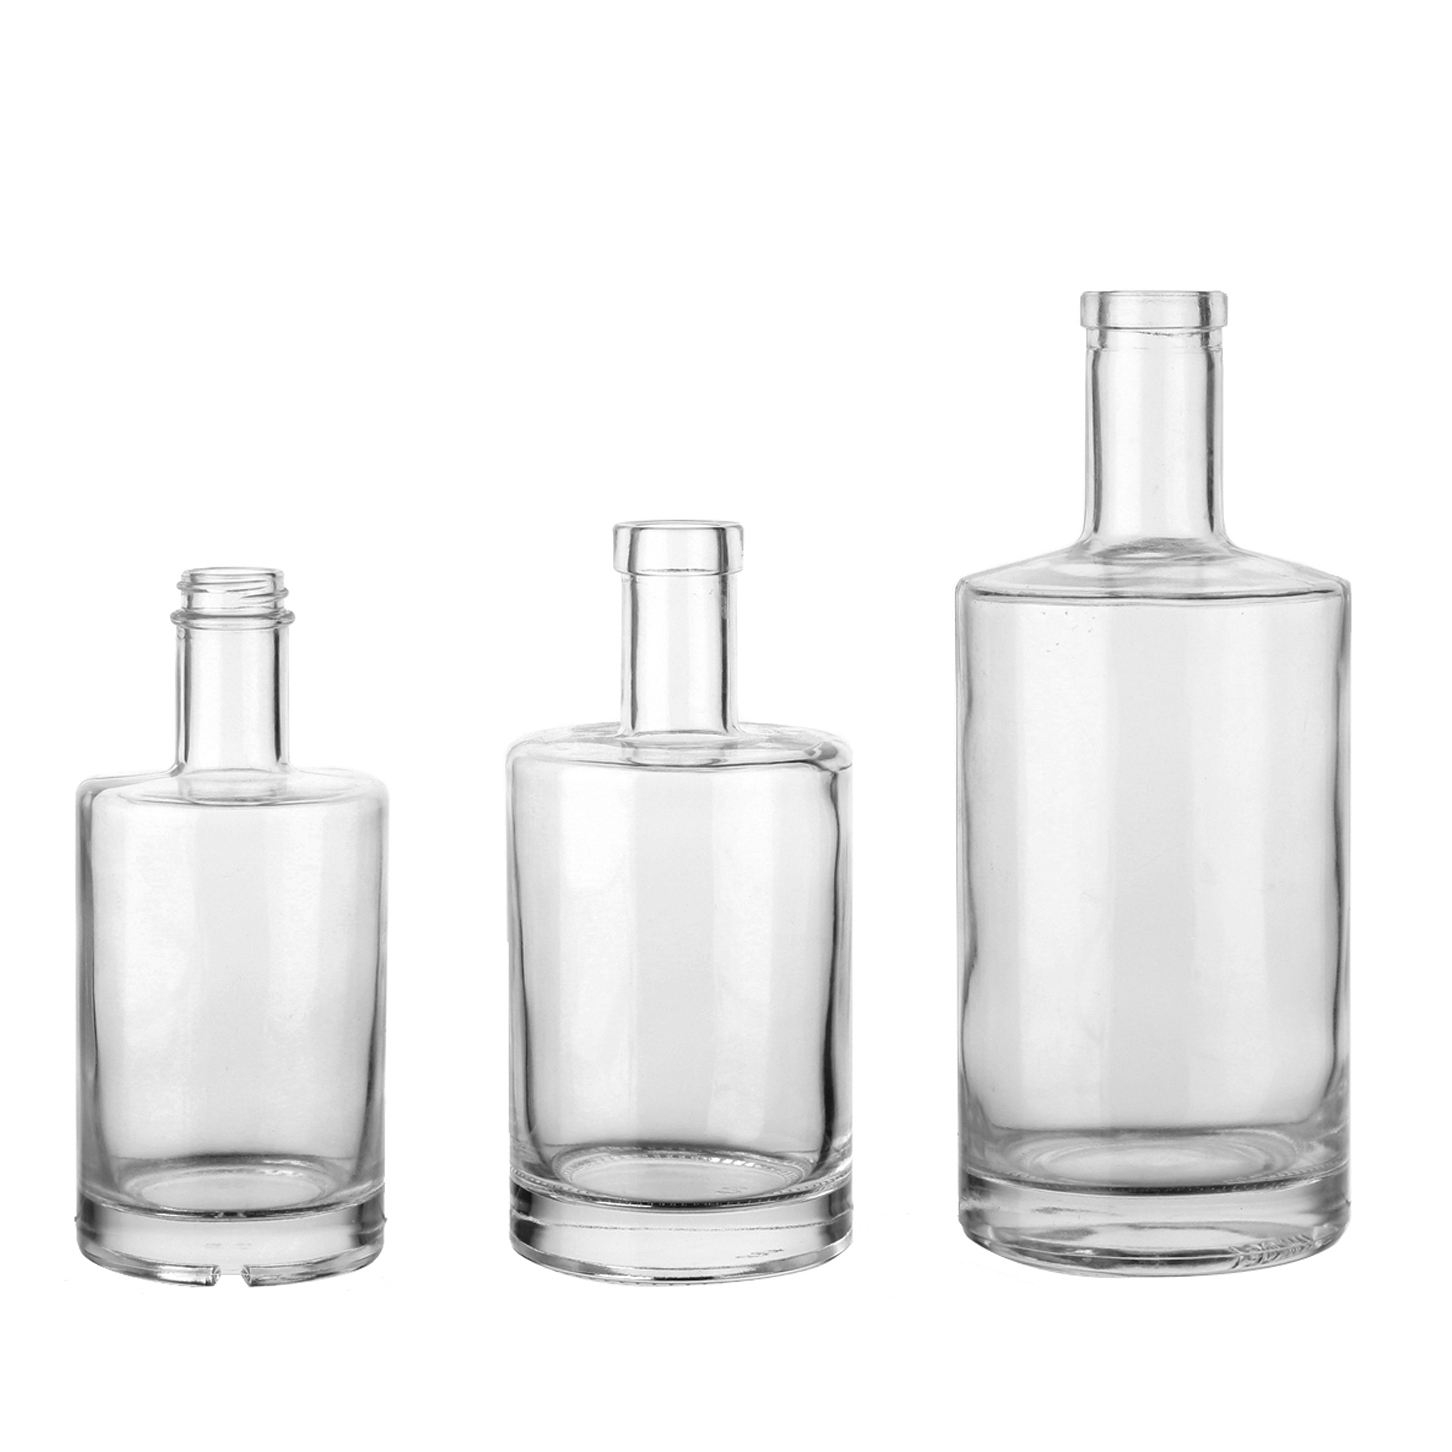 What molding process does glass bottle use commonly